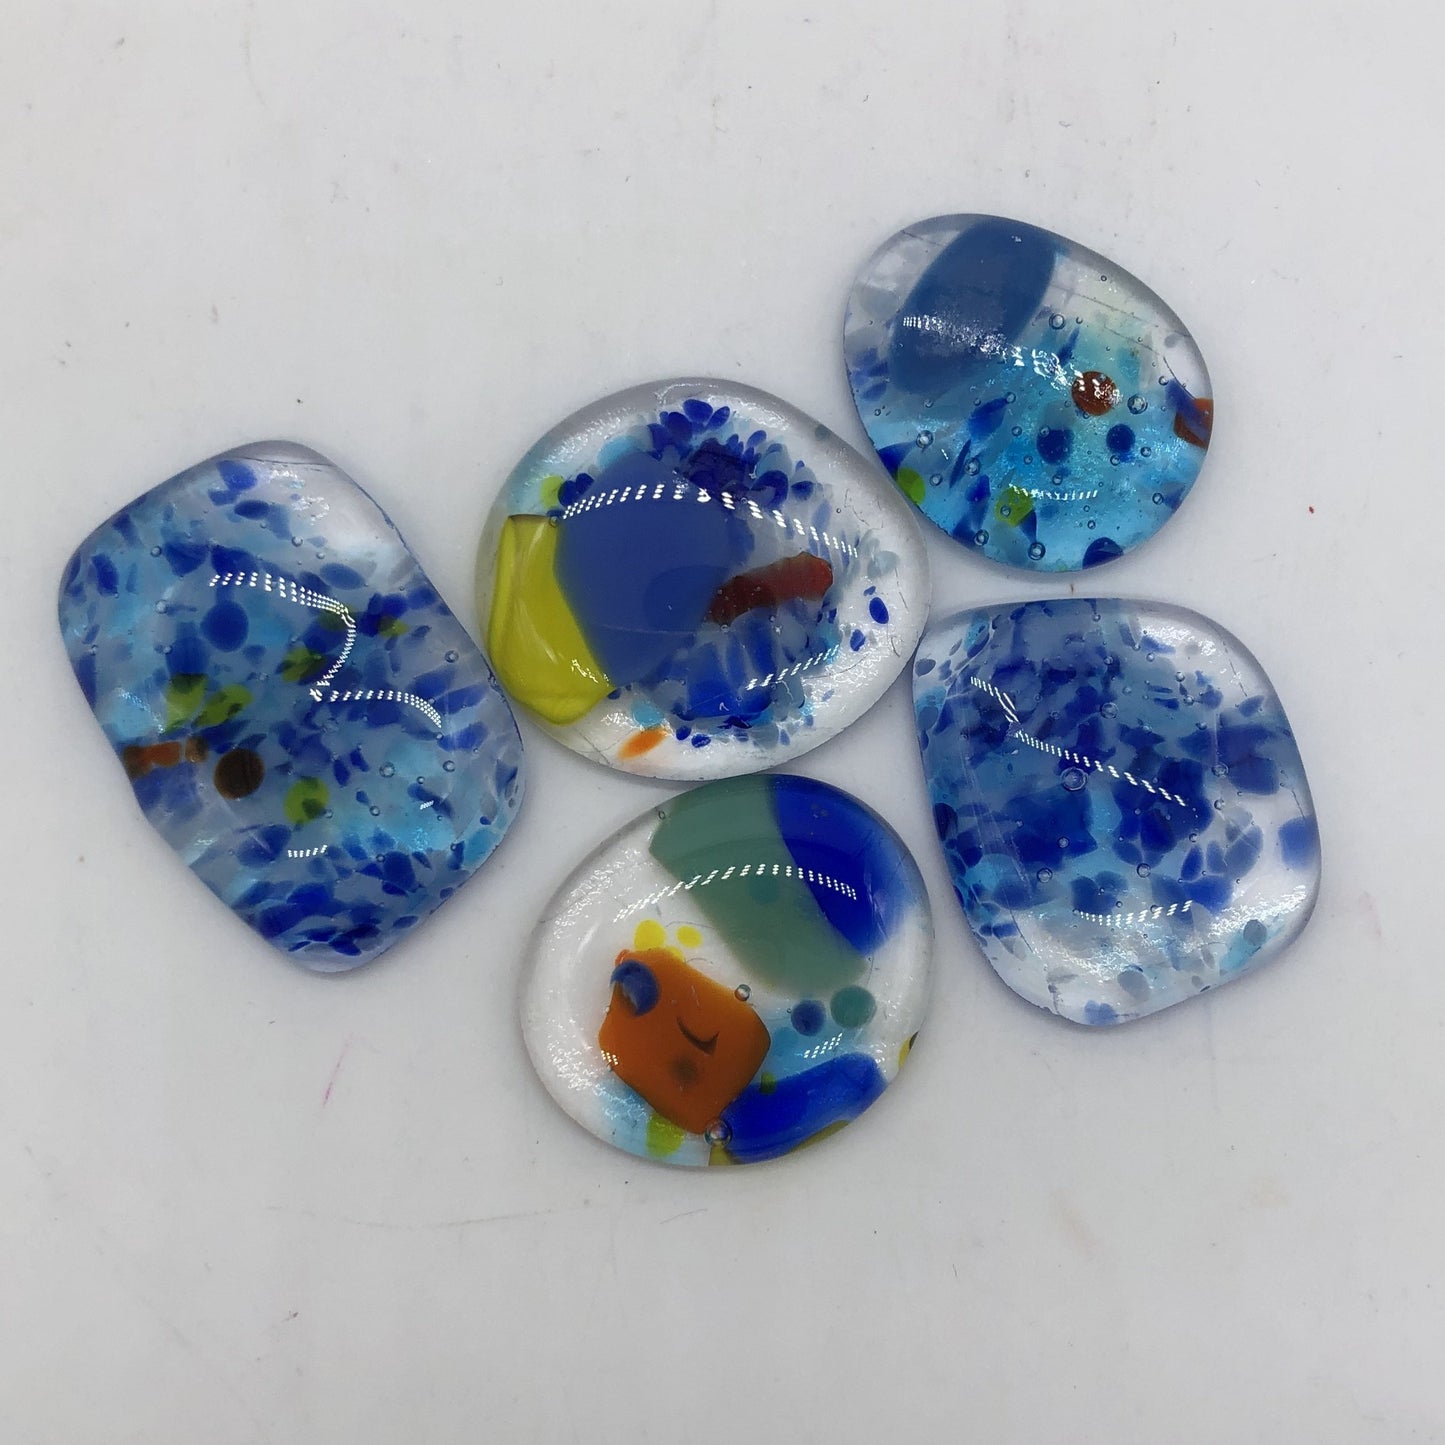 Five glass baubles of varying size and colors.  Mostly blue with accents of red, yellow and orange.